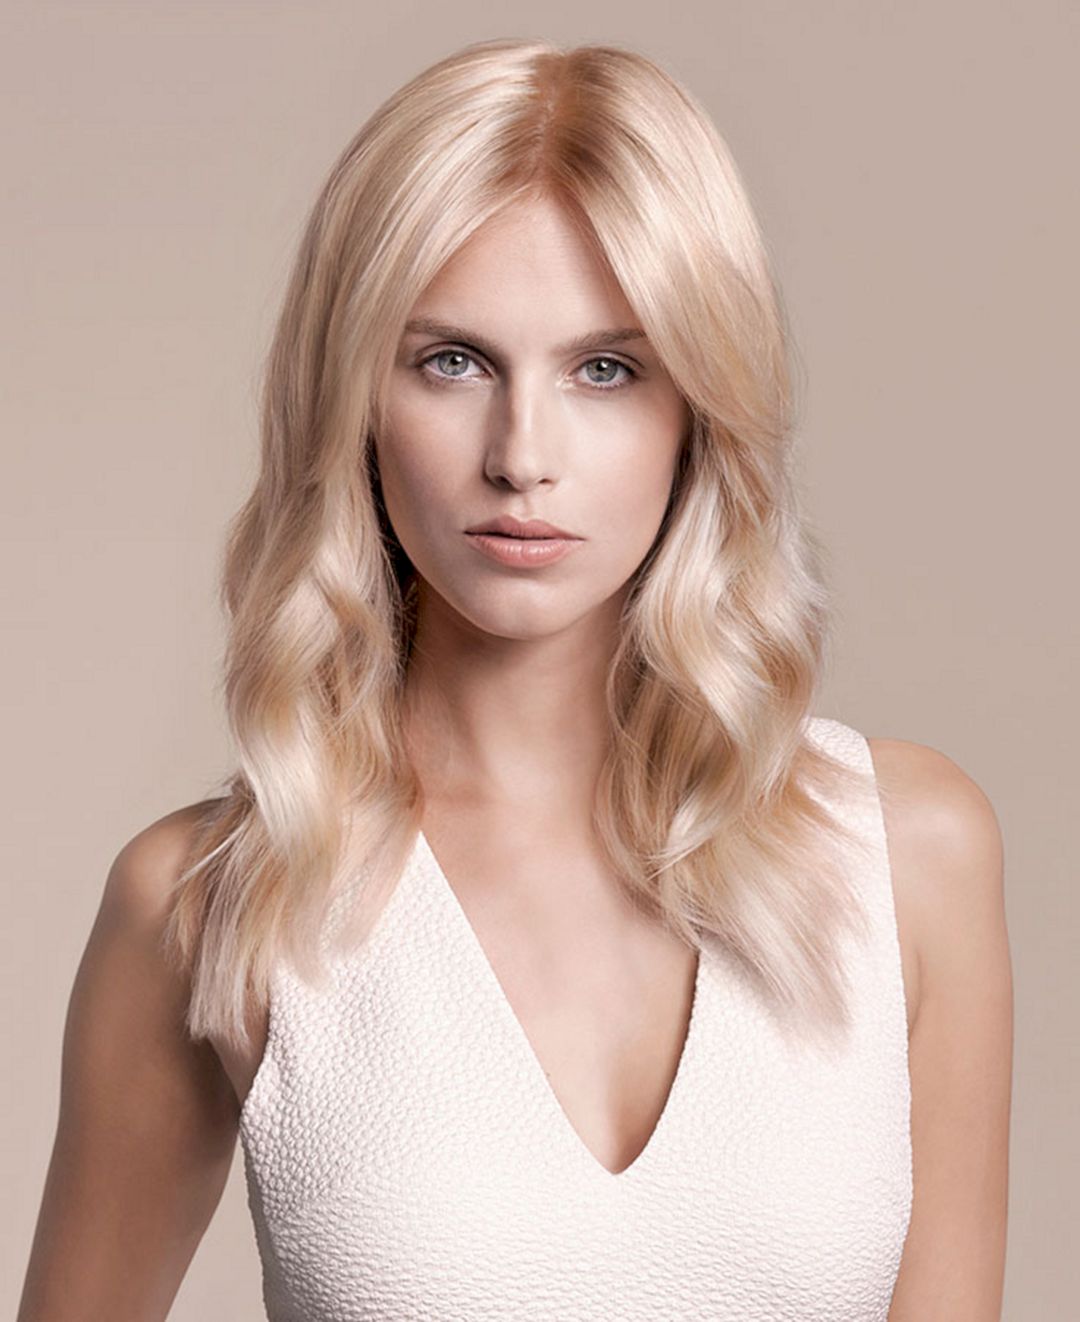 Goldwell hair from hairtrendy